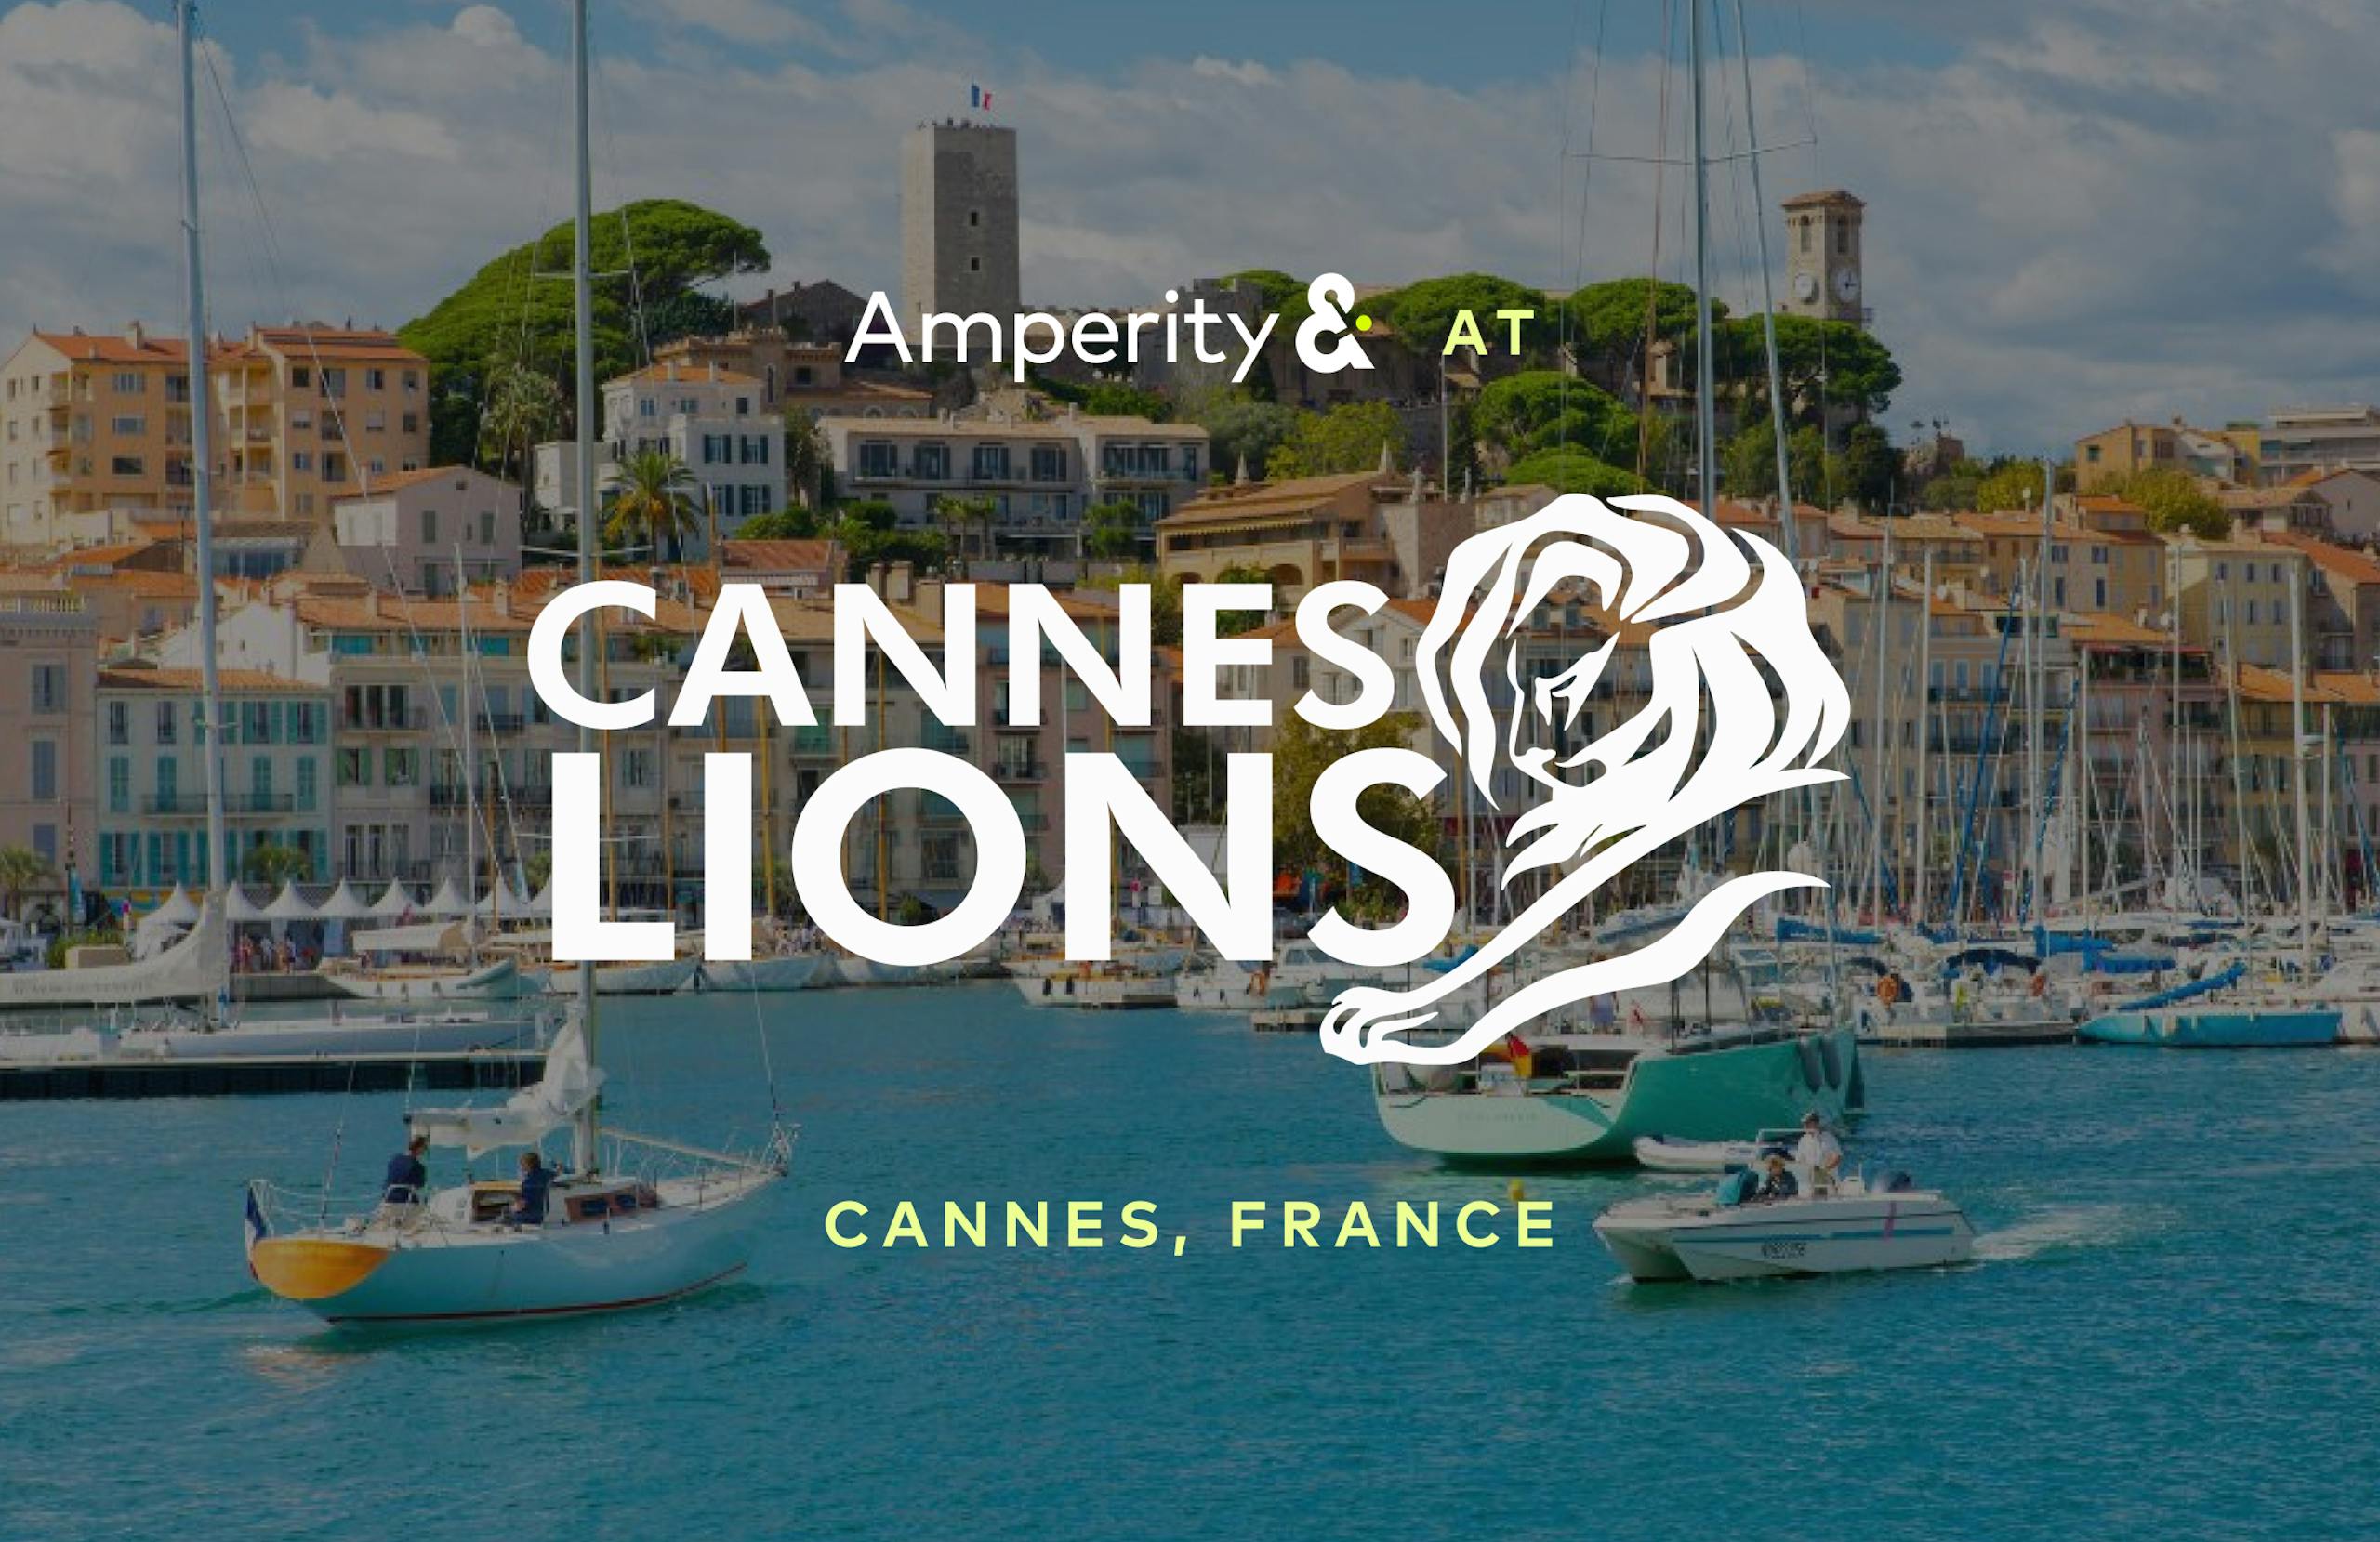 Amperity at Cannes Lions in France